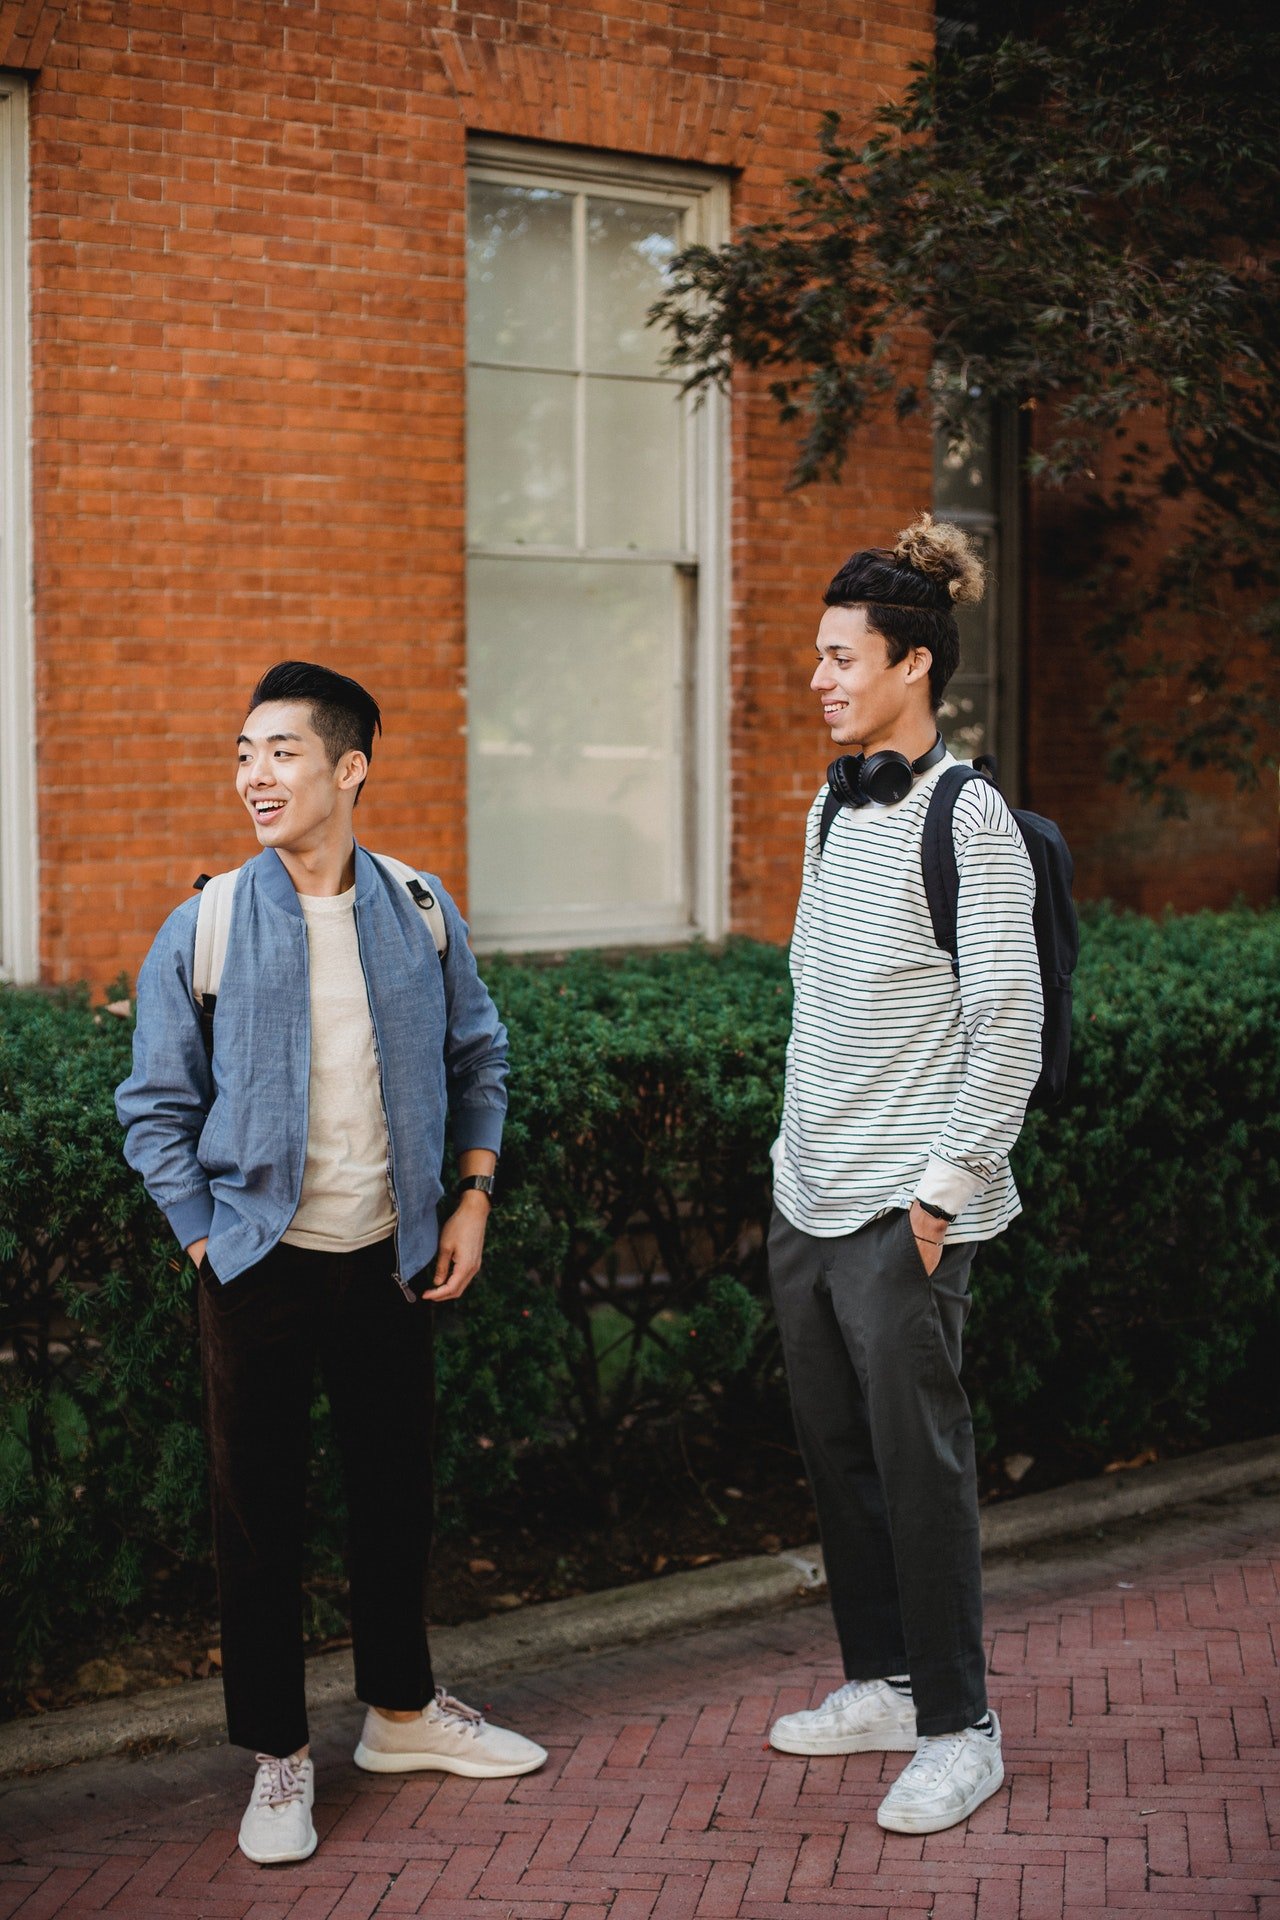 Two students looking at something | Source: Pexels